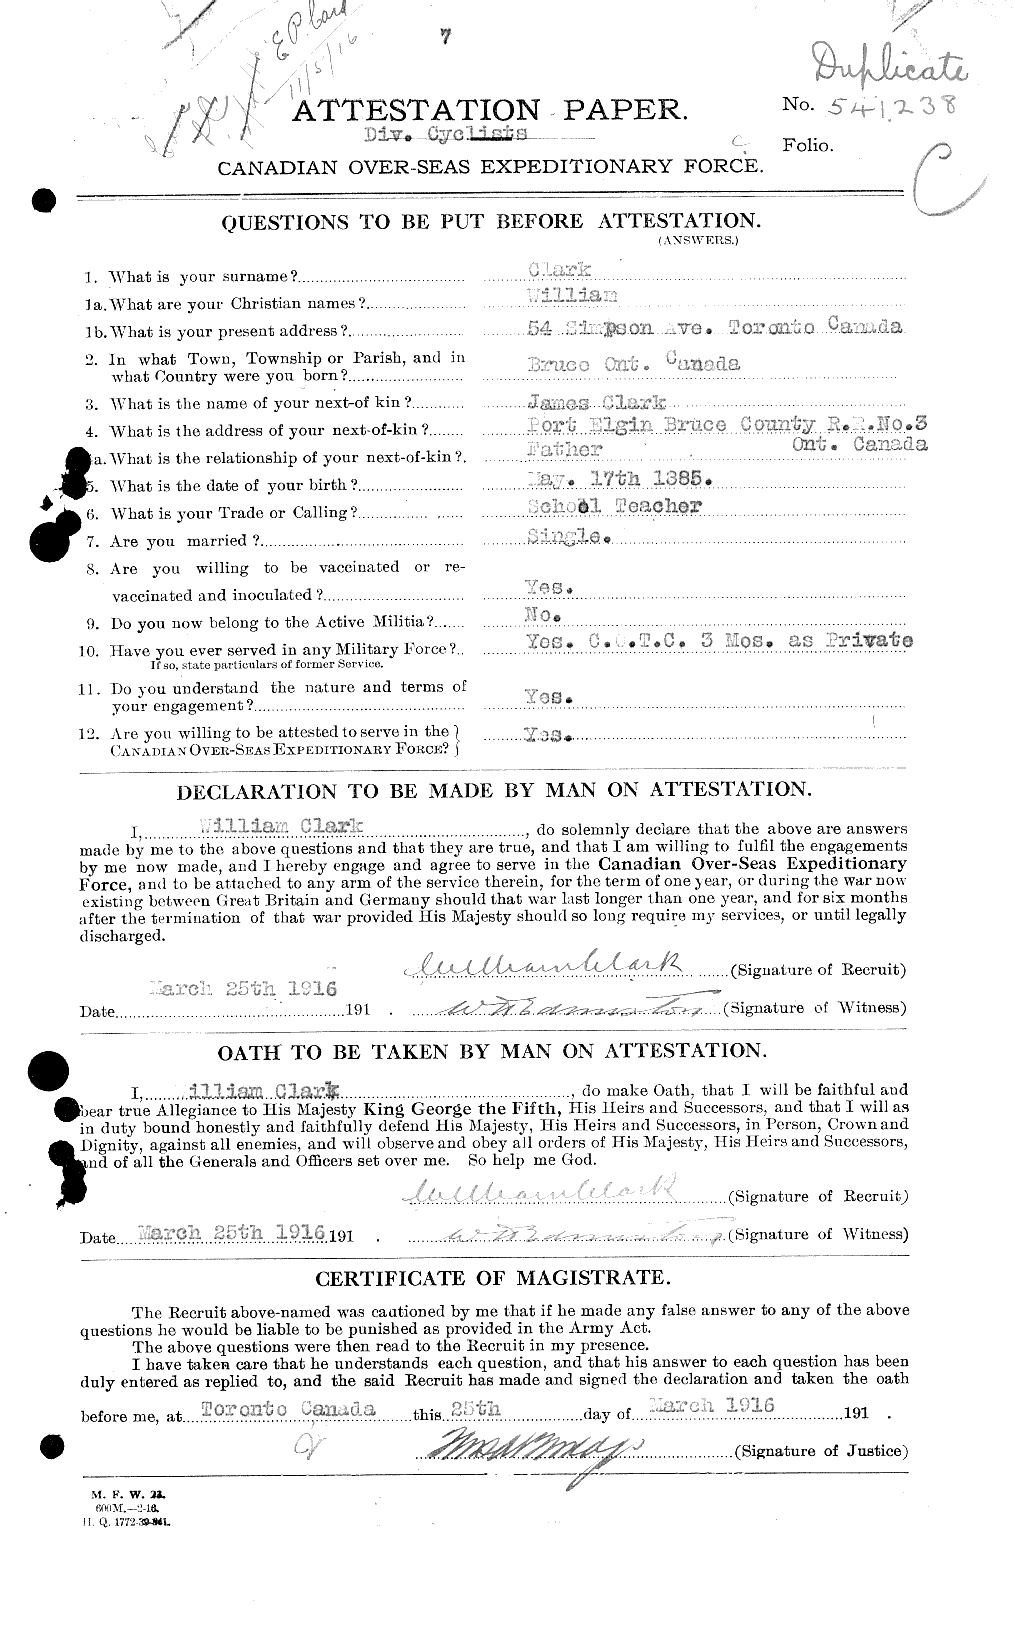 Personnel Records of the First World War - CEF 023552a